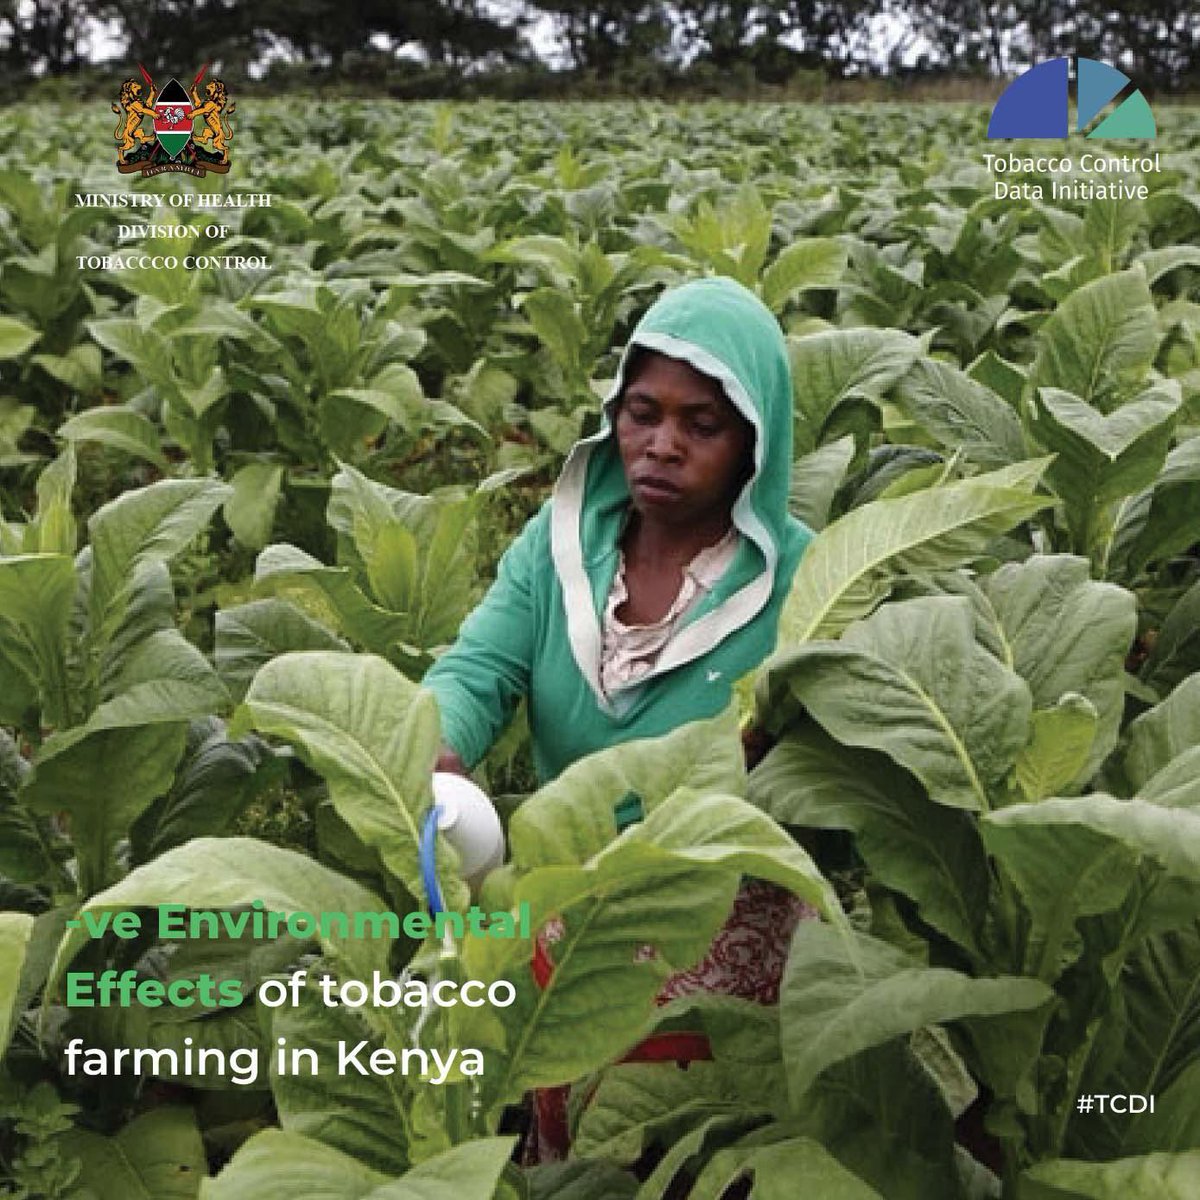 The negative environmental effects of tobacco farming in Kenya include:
a.Pollution of water bodies e.g. rivers
b.Soil Erosion
c.Soil Degradation
d.Deforestation
e.Air pollution during curing (drying) season
f. Fire incidents during curing season.
#TobaccoFreeFarmsKE #TCDI